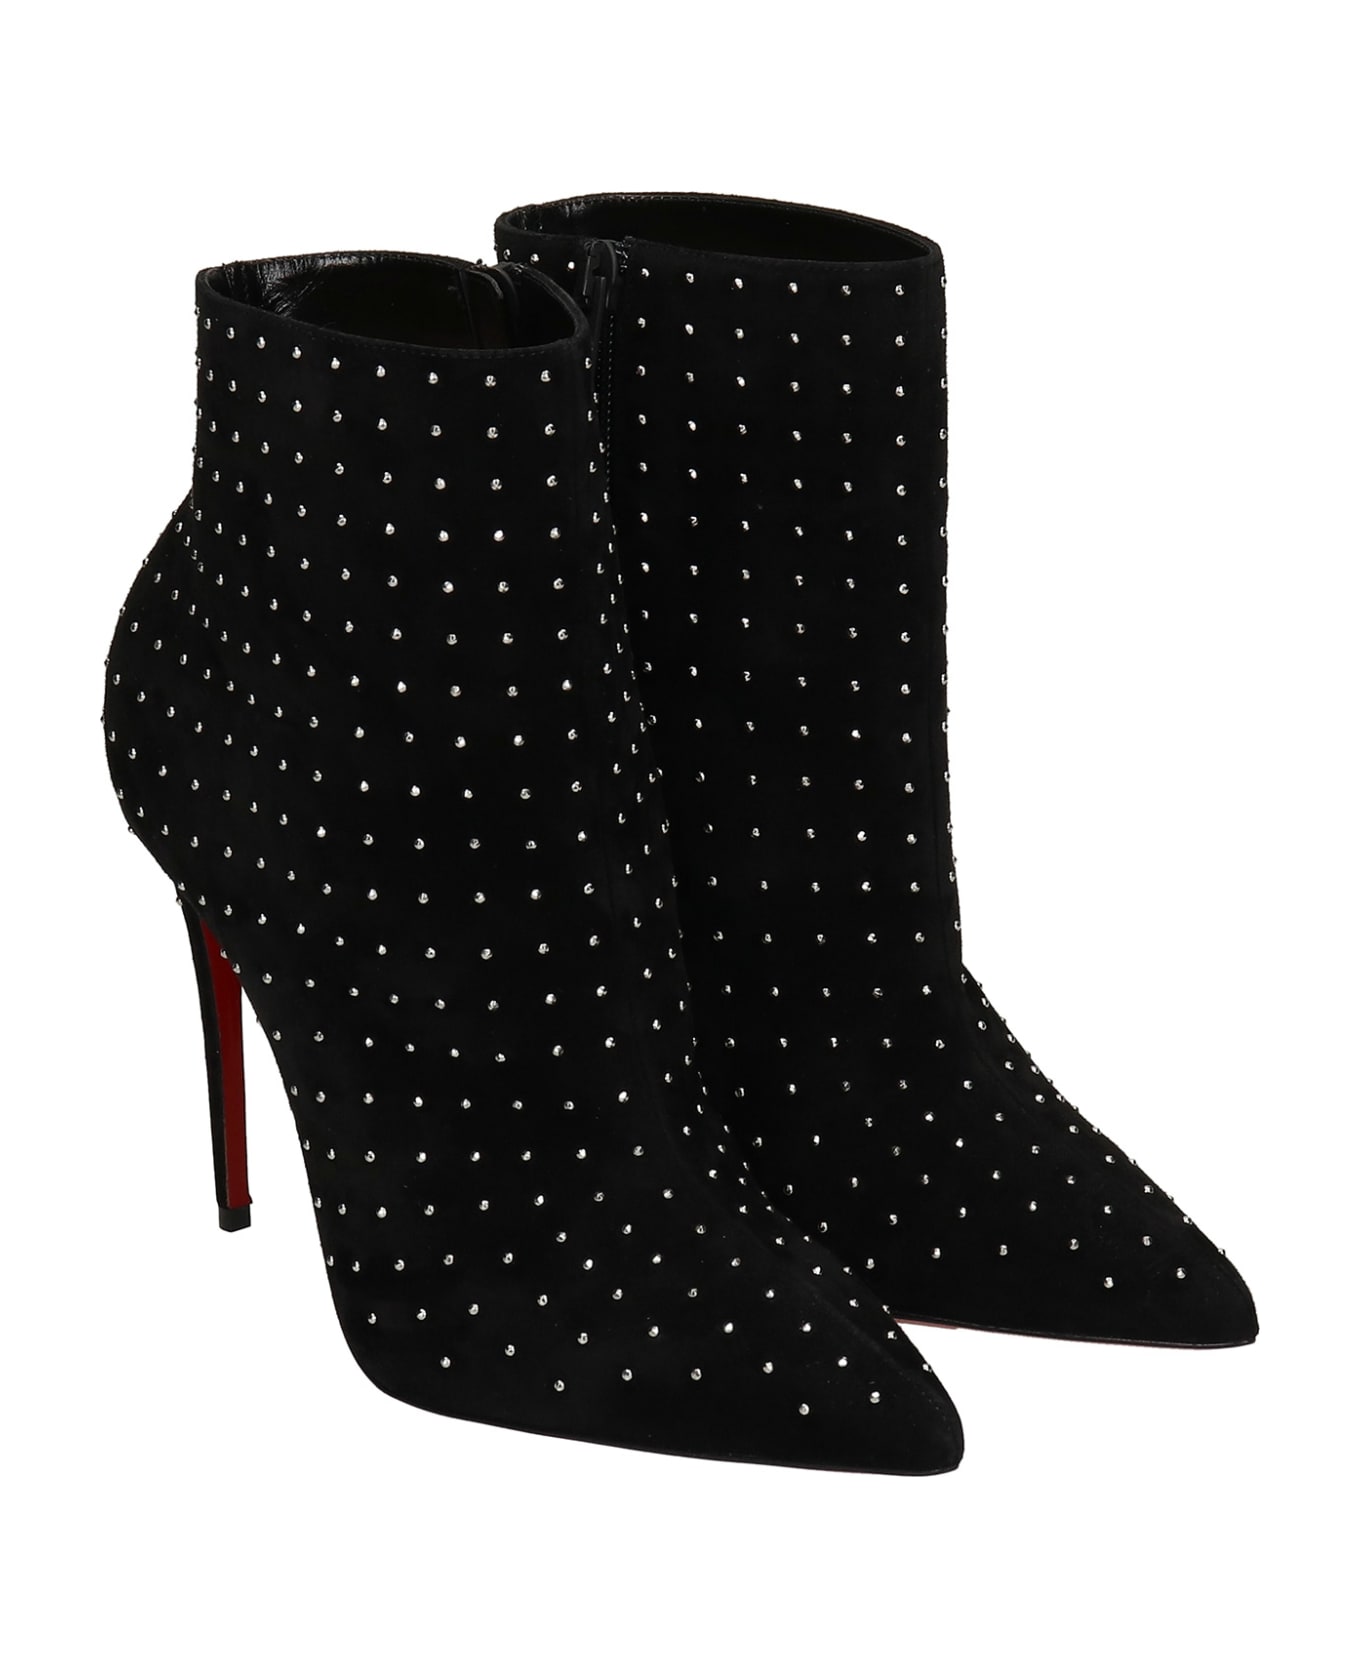 Christian Louboutin So Kate Booty High Heels Ankle Boots In Black Suede - black